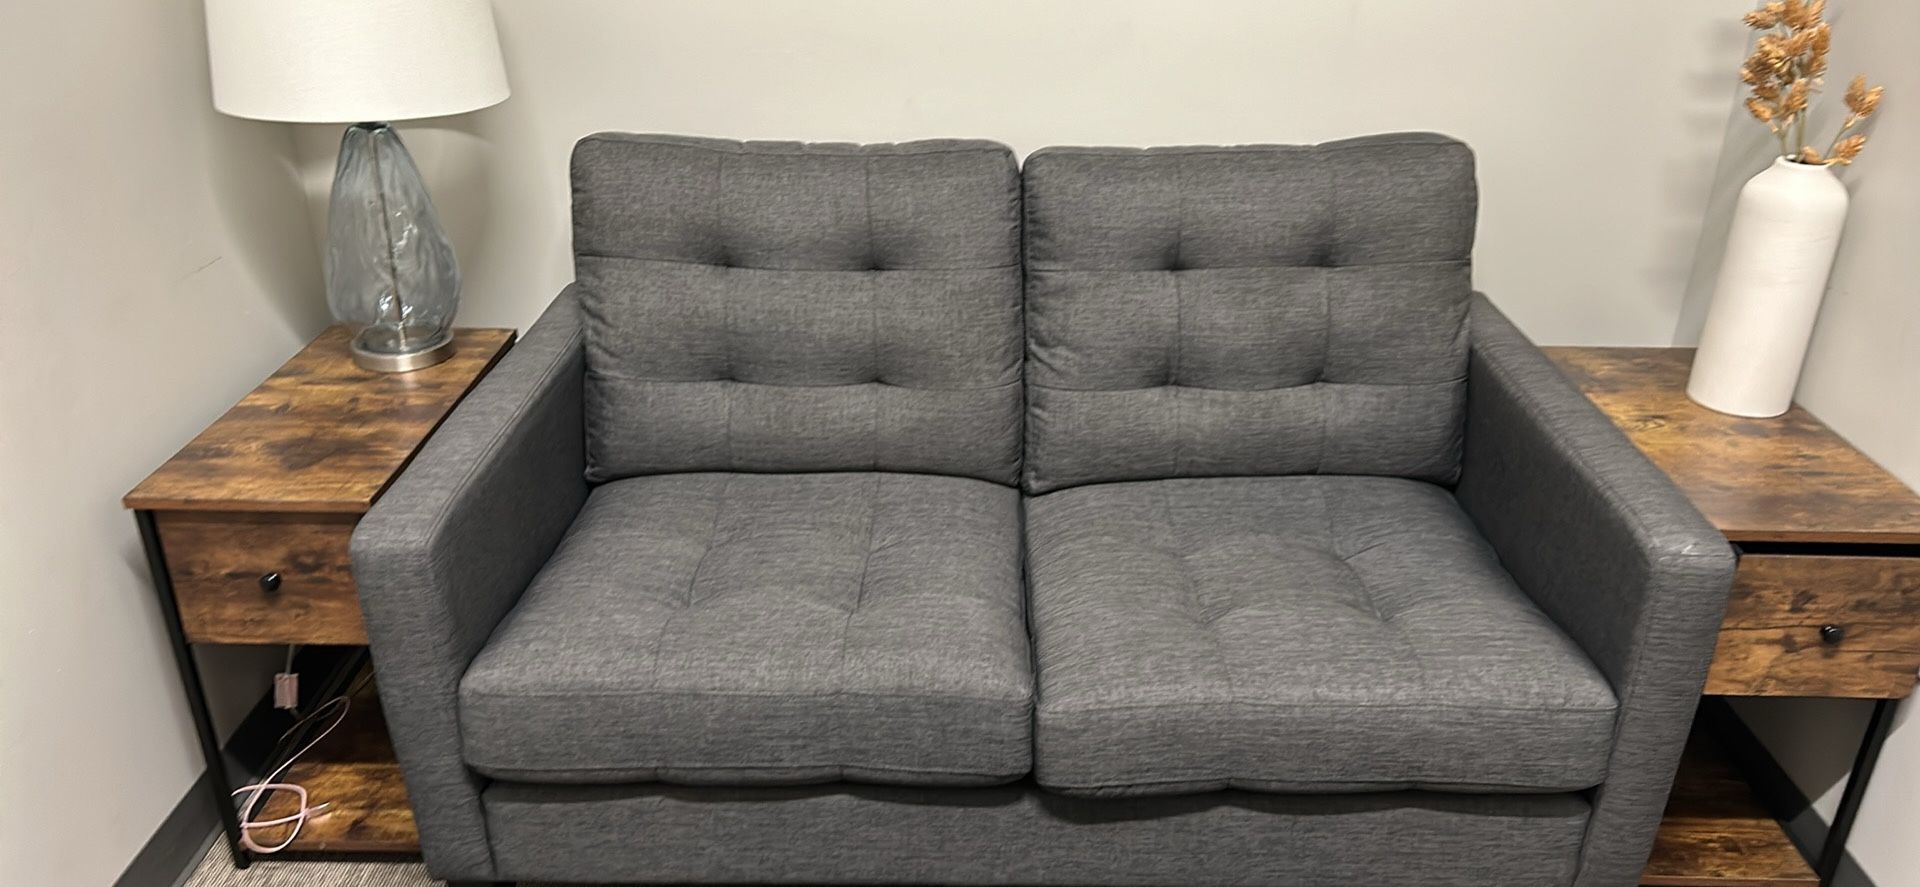 Sofa/couch/loveseat